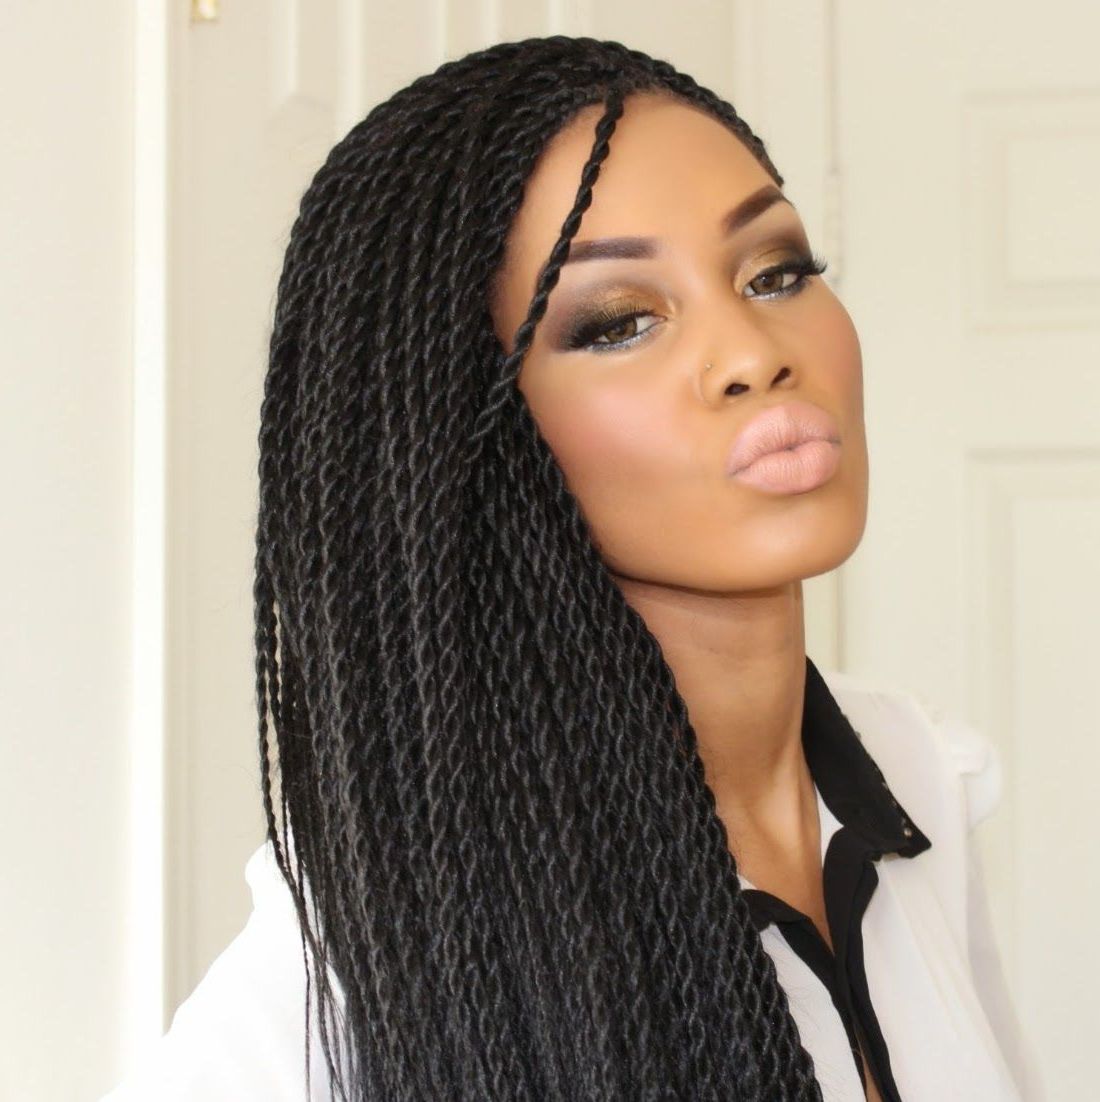 Newest Black And Brown Senegalese Twist Hairstyles Intended For Senegalese Twist Braids Medium Size – Google Search (View 4 of 20)